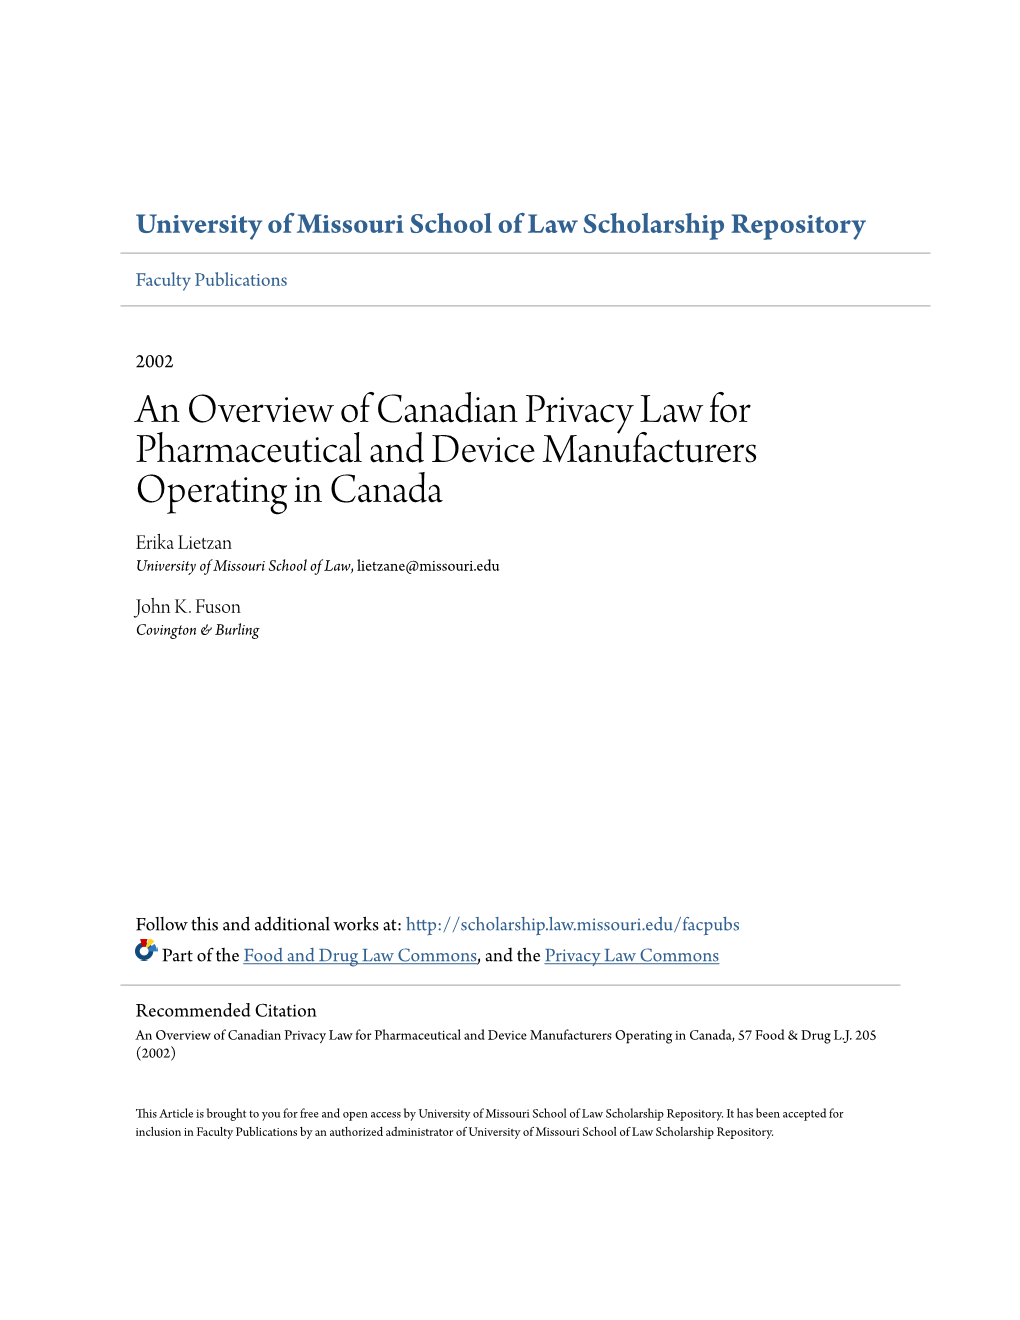 An Overview of Canadian Privacy Law for Pharmaceutical and Device Manufacturers Operating in Canada